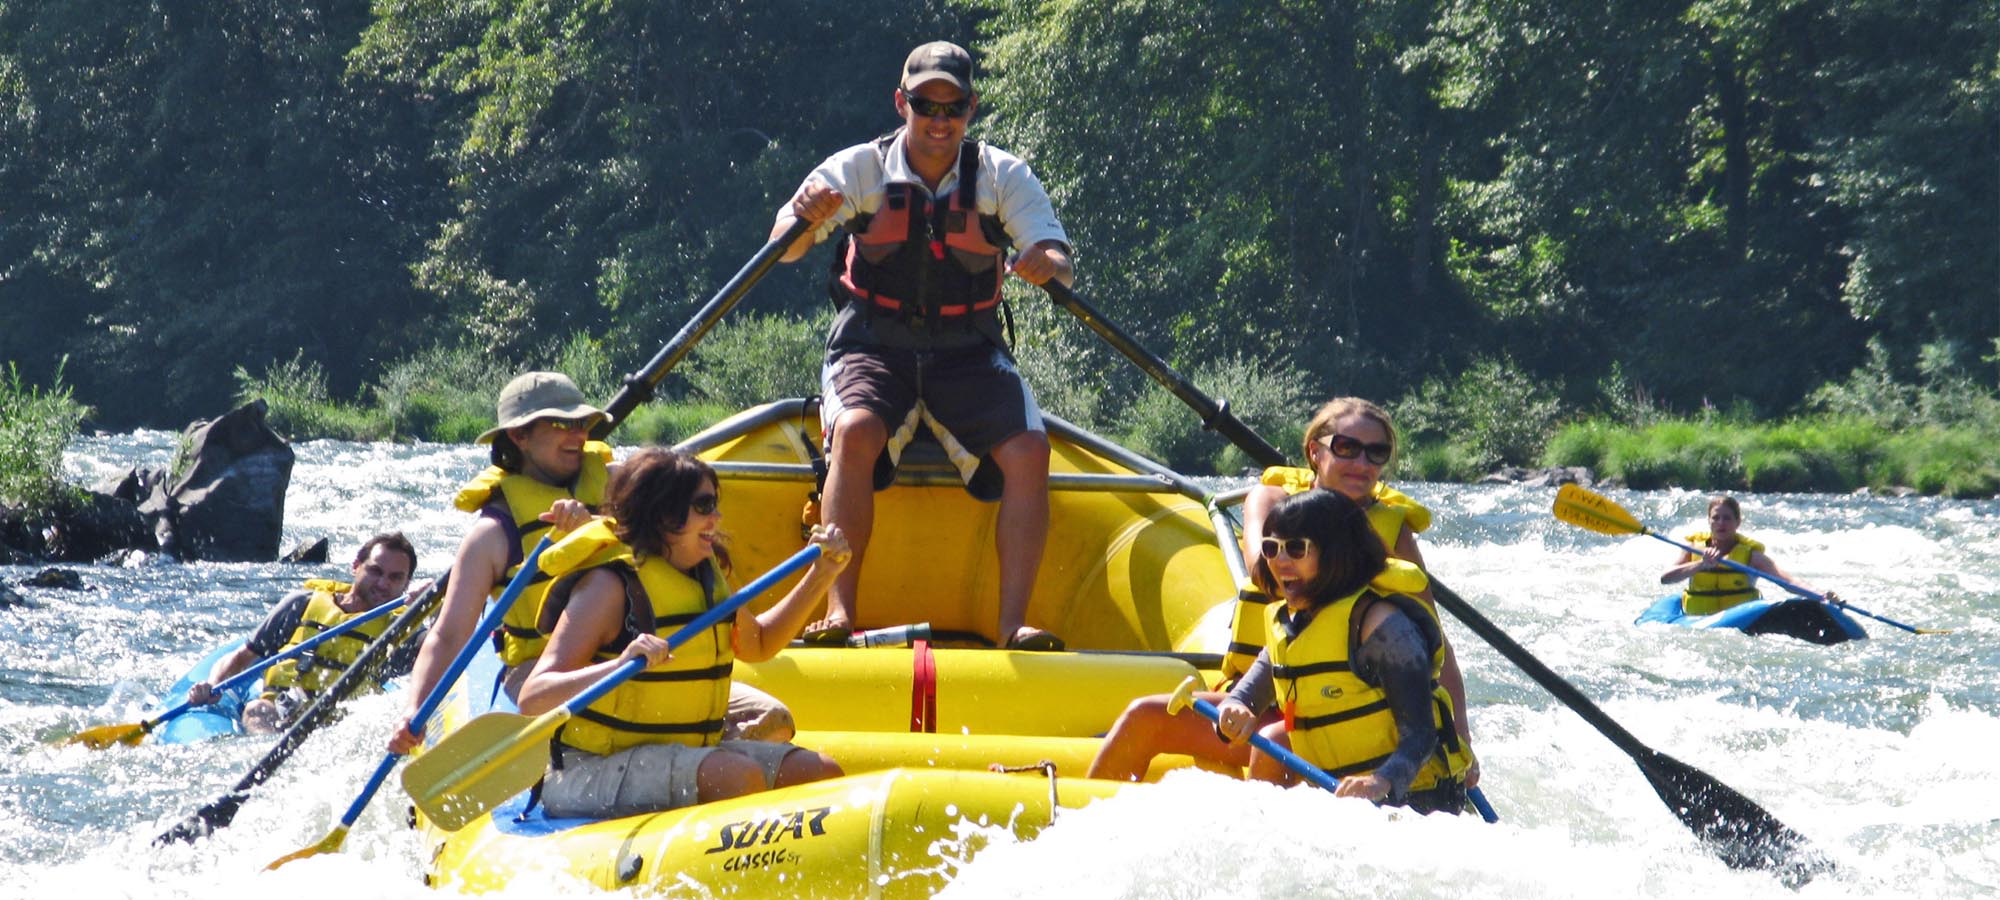 Rafters riding along the Rogue River in a yellow raft